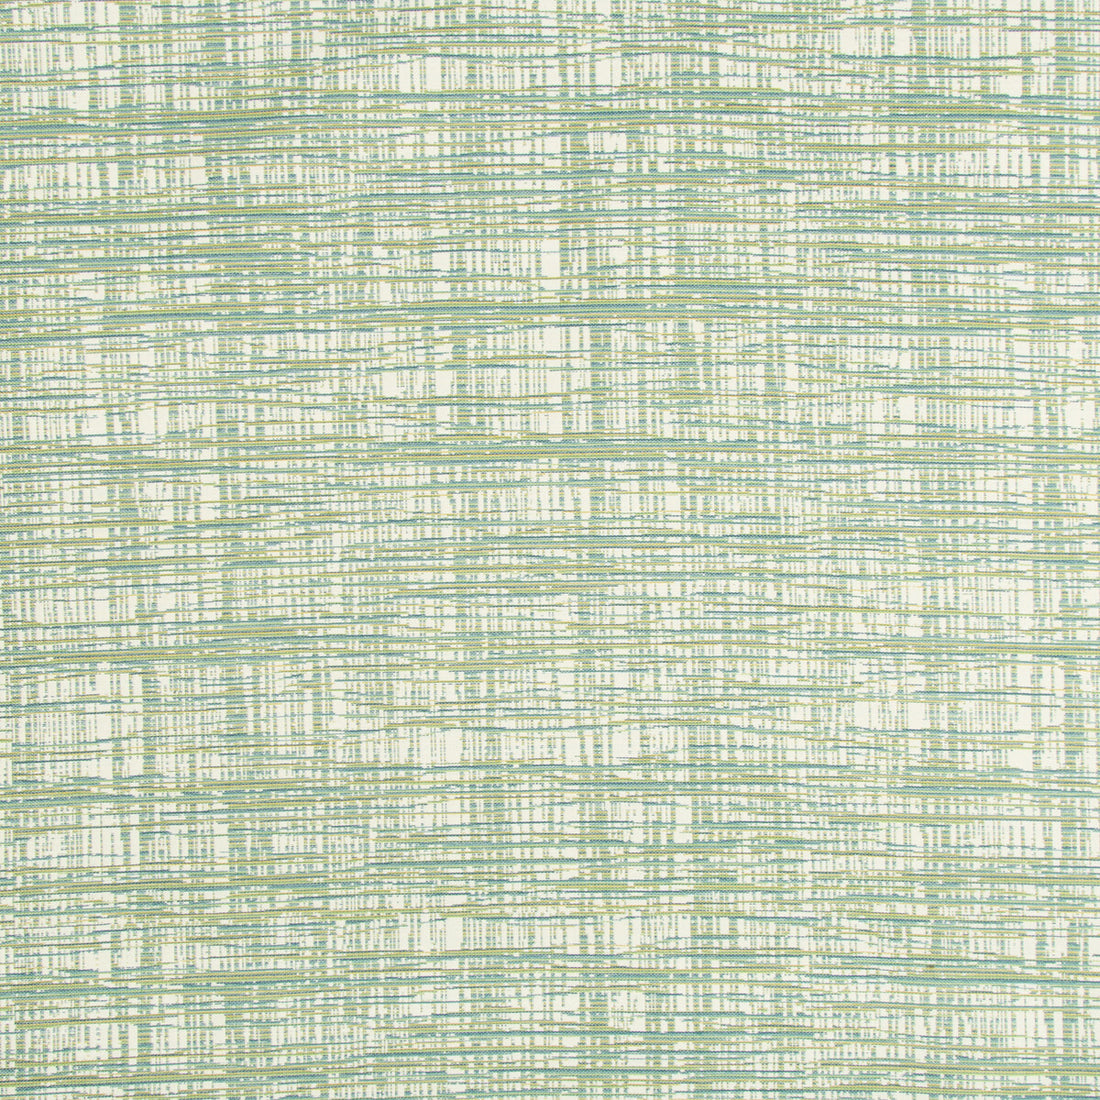 Kravet Design fabric in 34691-3 color - pattern 34691.3.0 - by Kravet Design in the Crypton Home collection